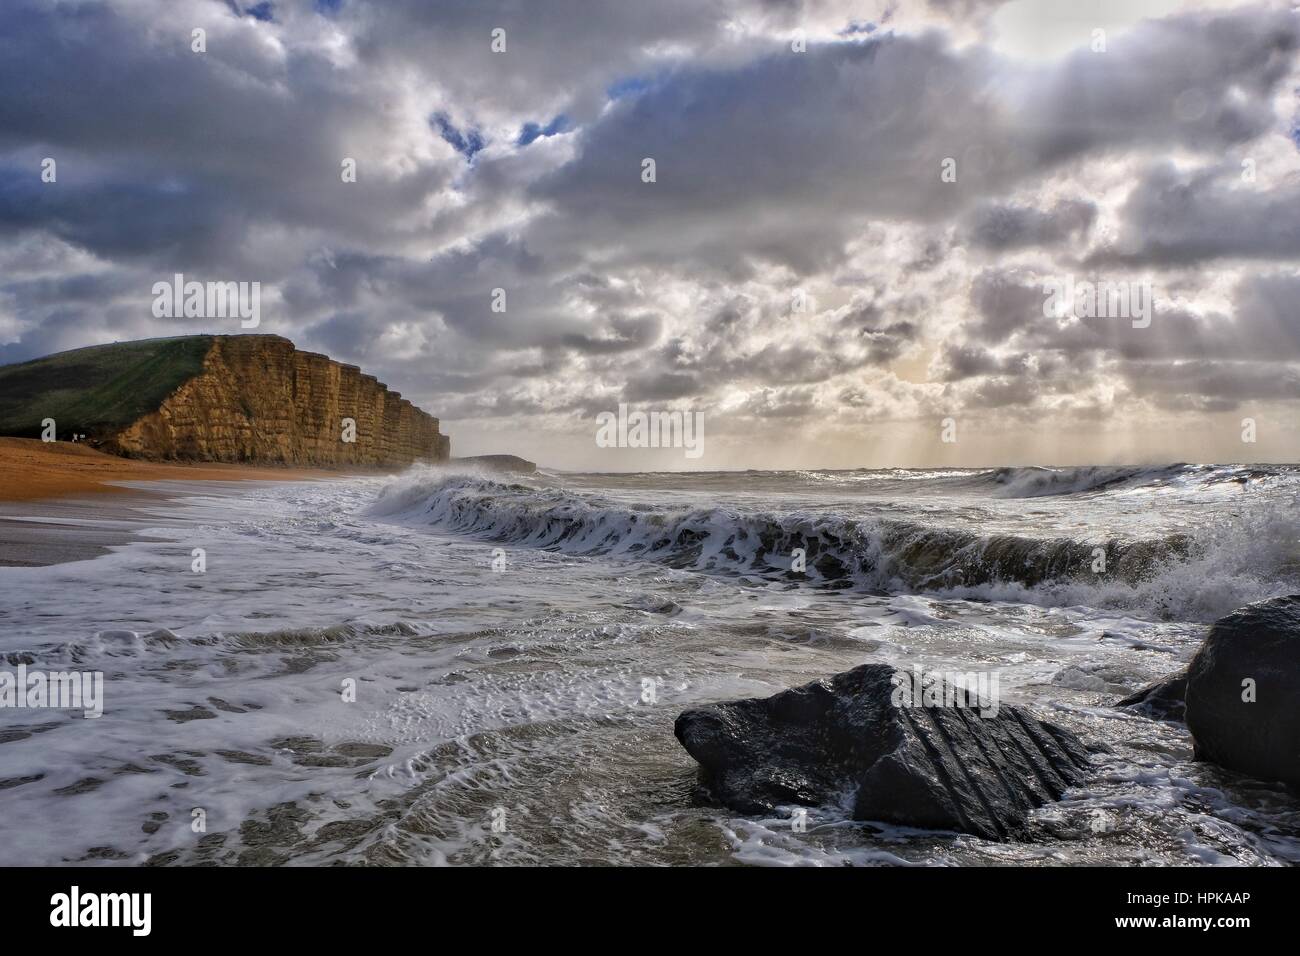 West Bay, Dorset, UK. 23rd Feb, 2017. Storm Doris blows in long the Dorset Coast. Winds of 50 to 60mph are expected during the day with coastal areas being particularly vulnerable. High tide in the area is expected at 16:15 when winds could still be particularly strong. Credit: Tom Corban/Alamy Live News Stock Photo